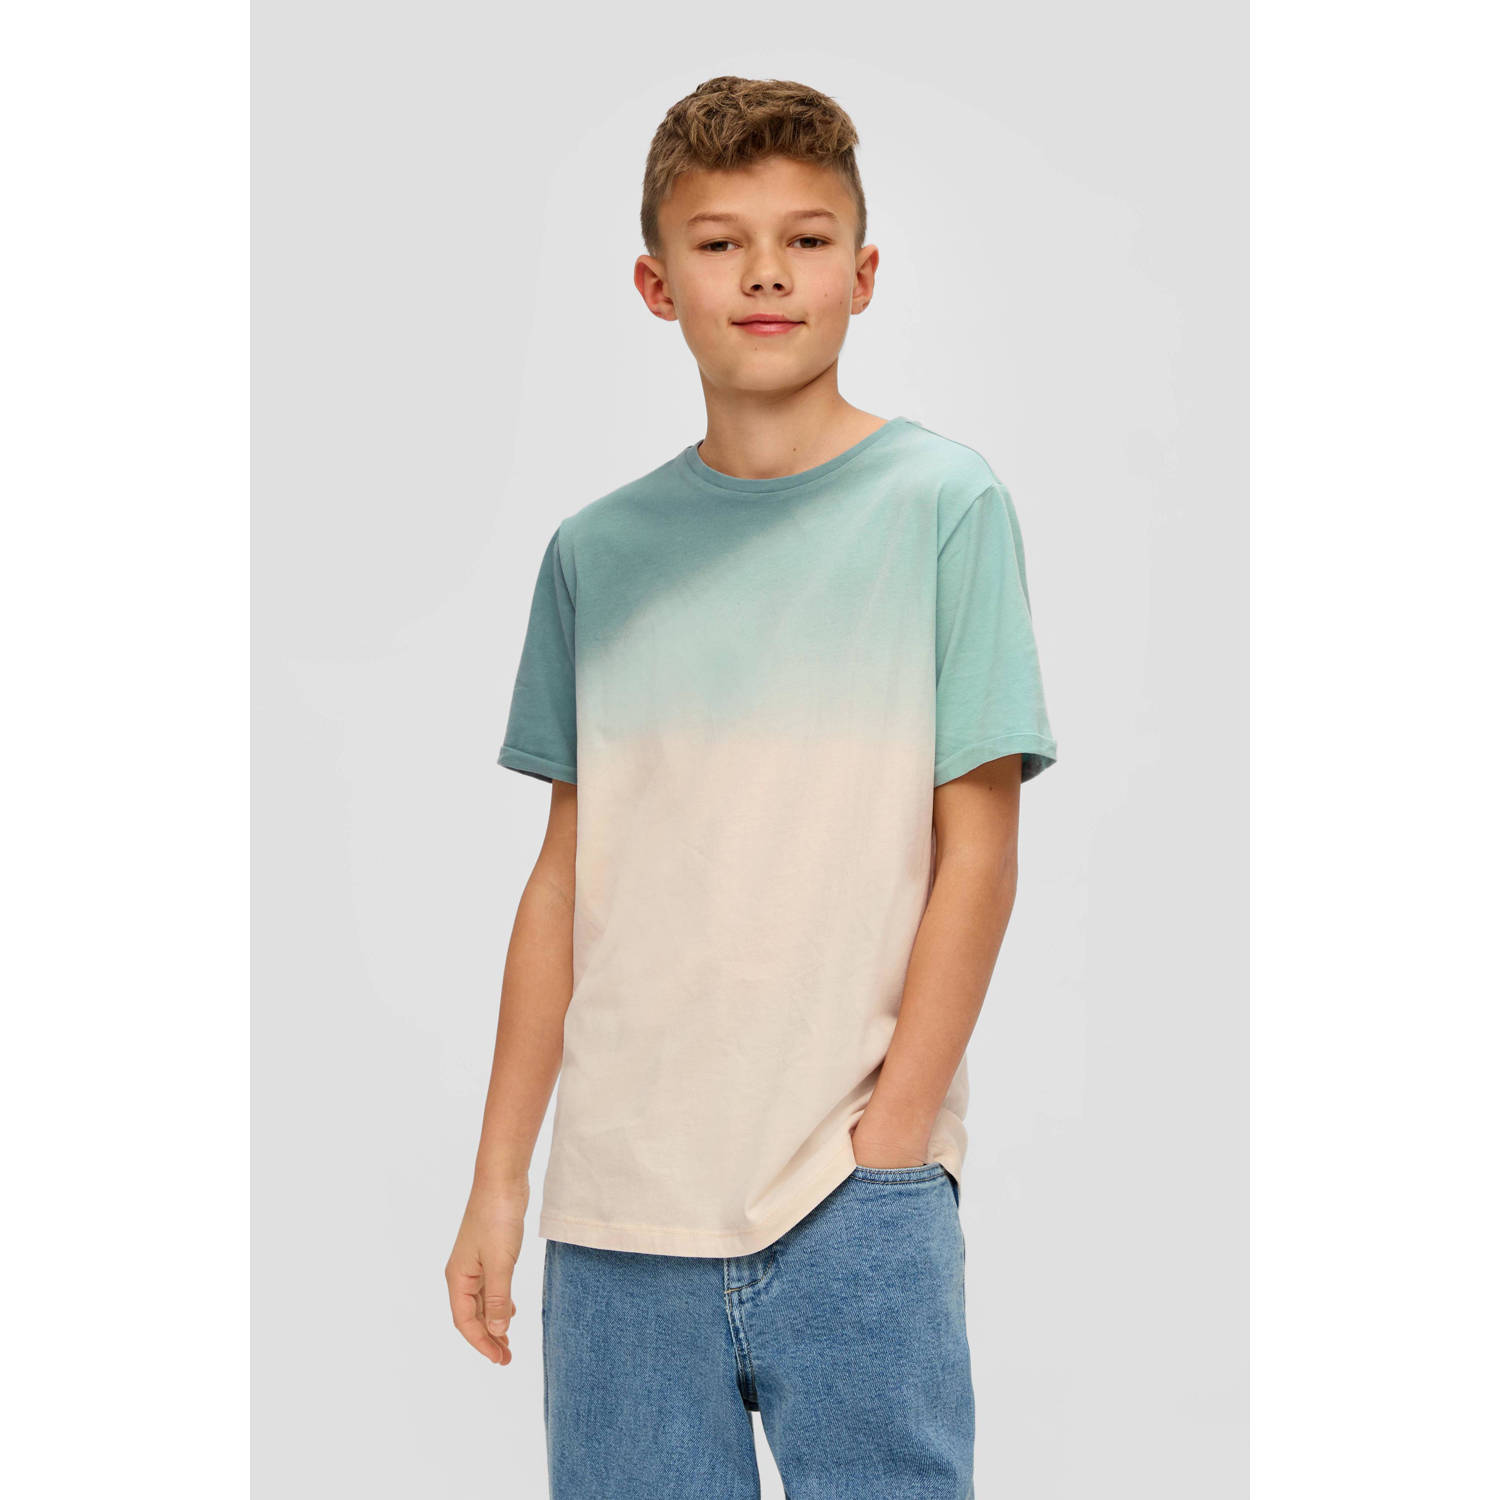 s.Oliver dip-dye T-shirt turquoise beige